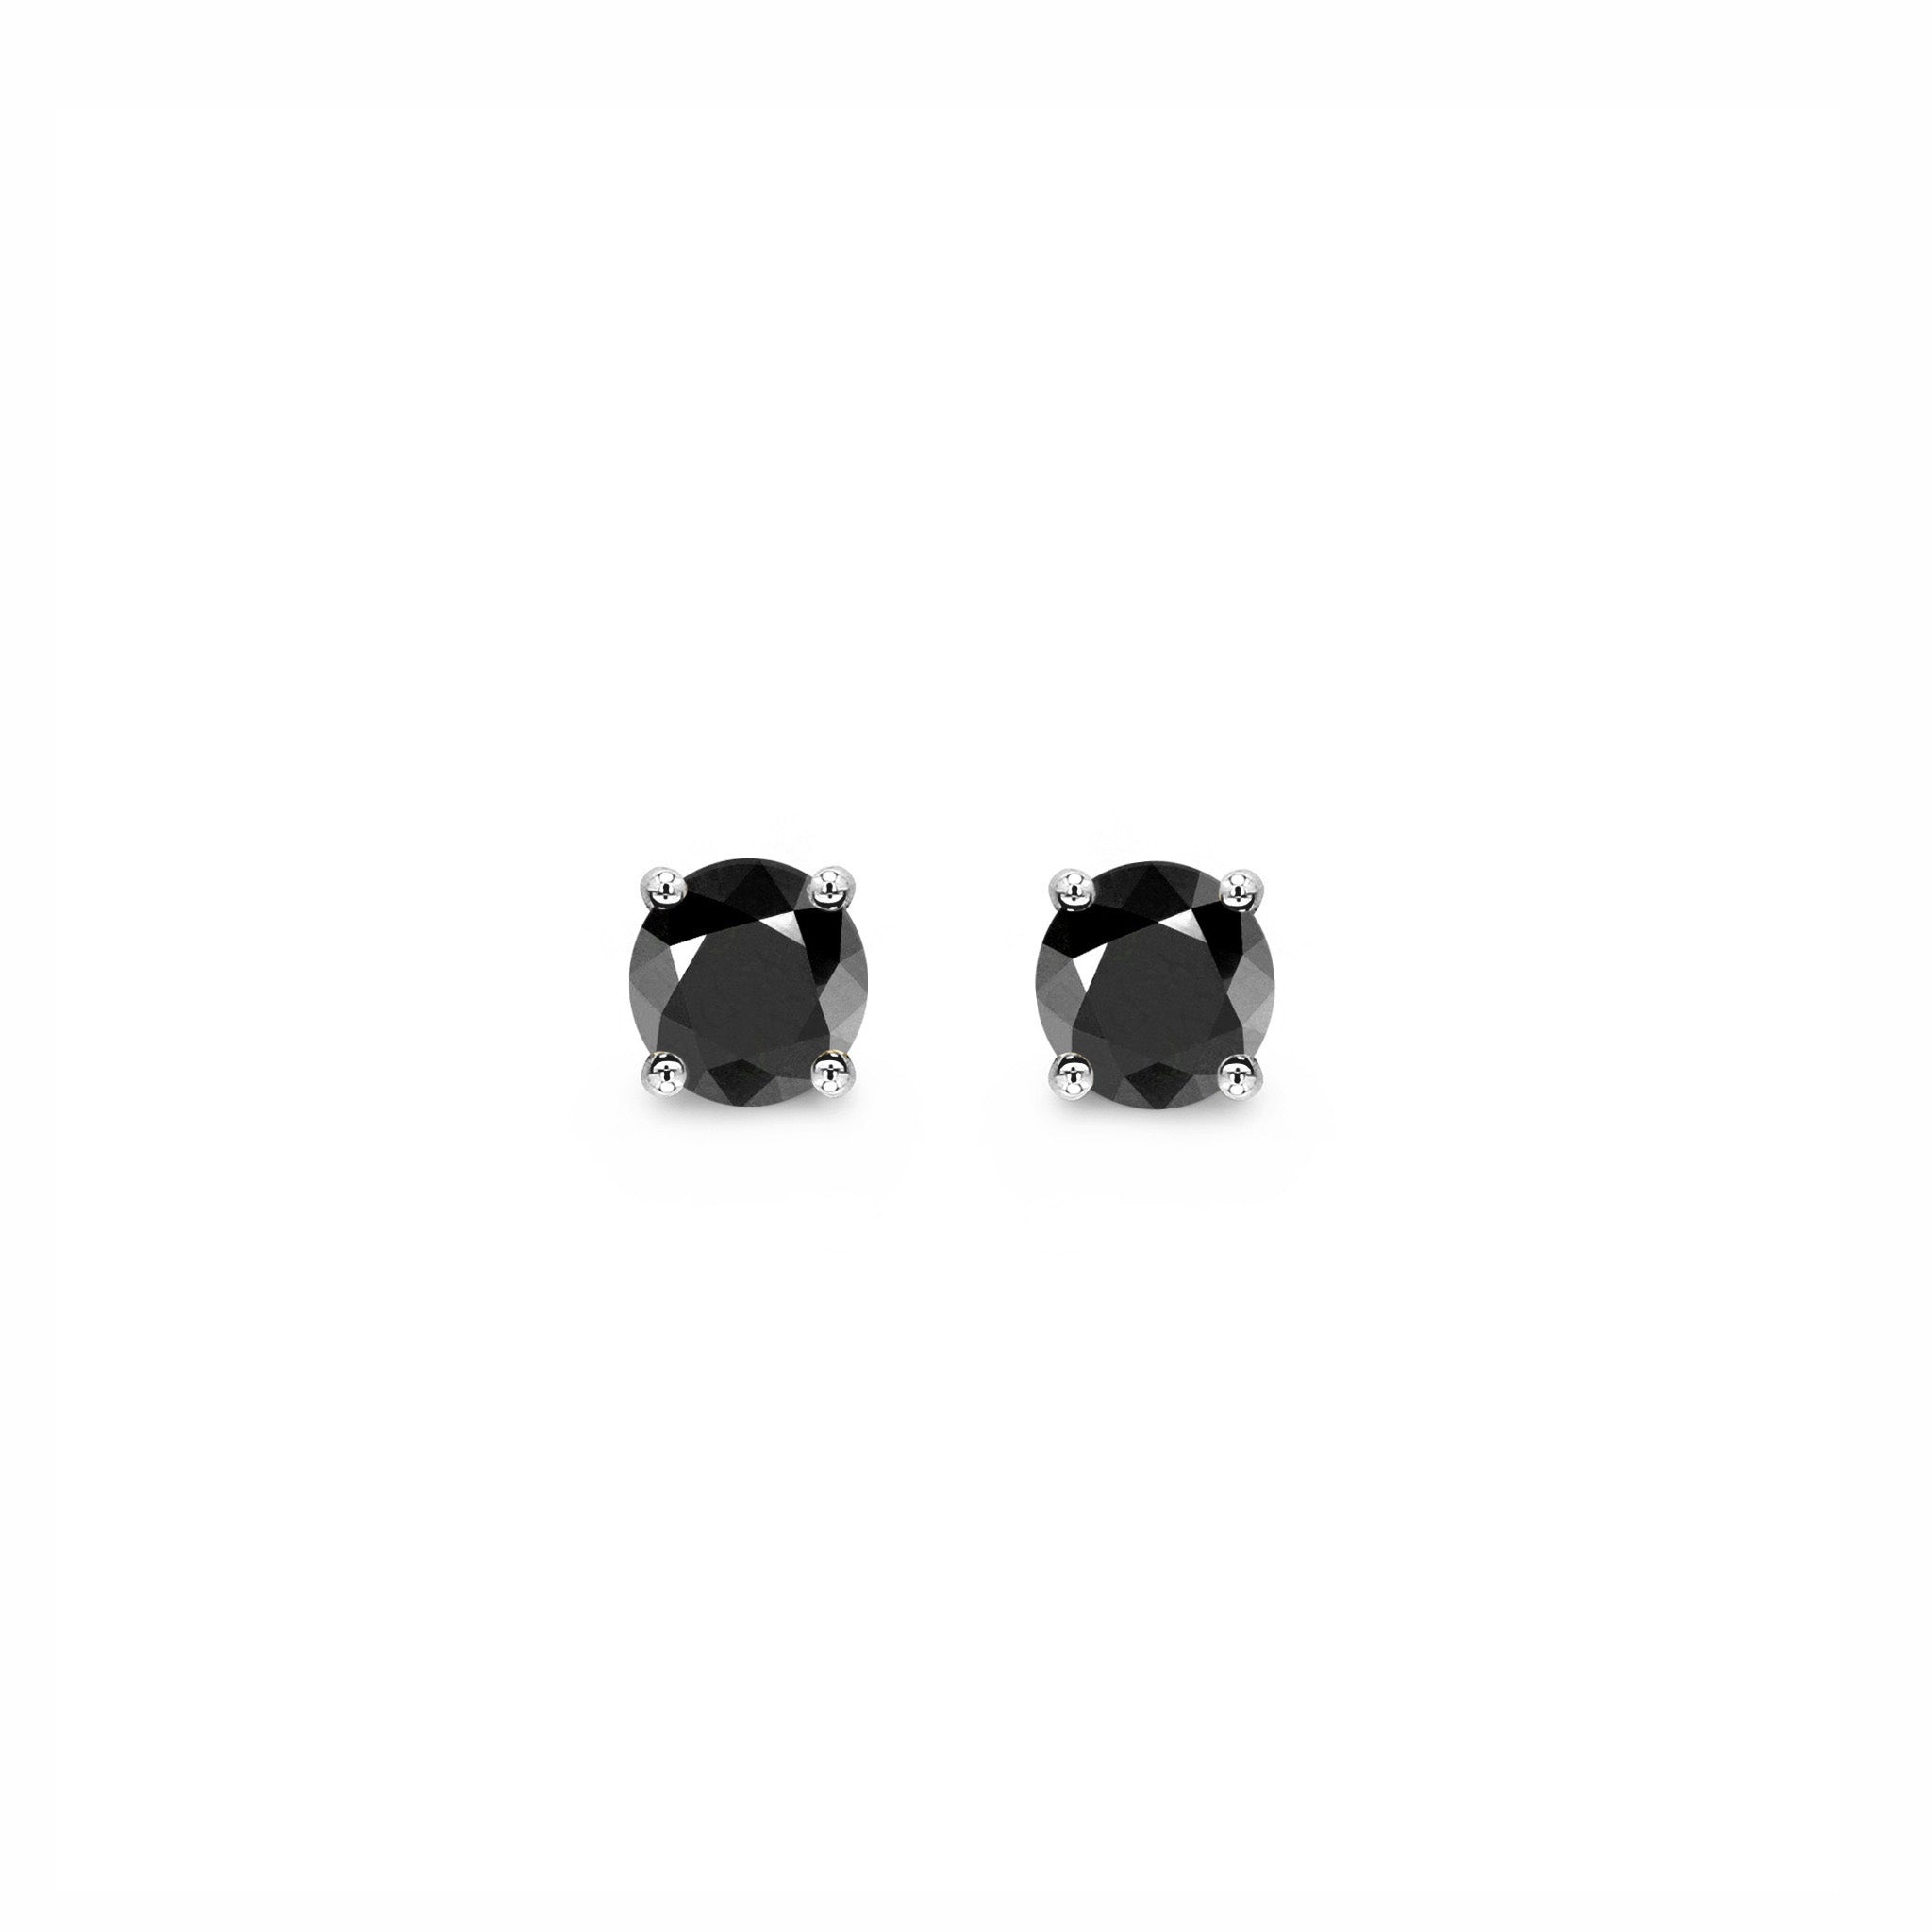 Black Diamond Solitaire Earrings 1.00 Carat in 18K White Gold Front View